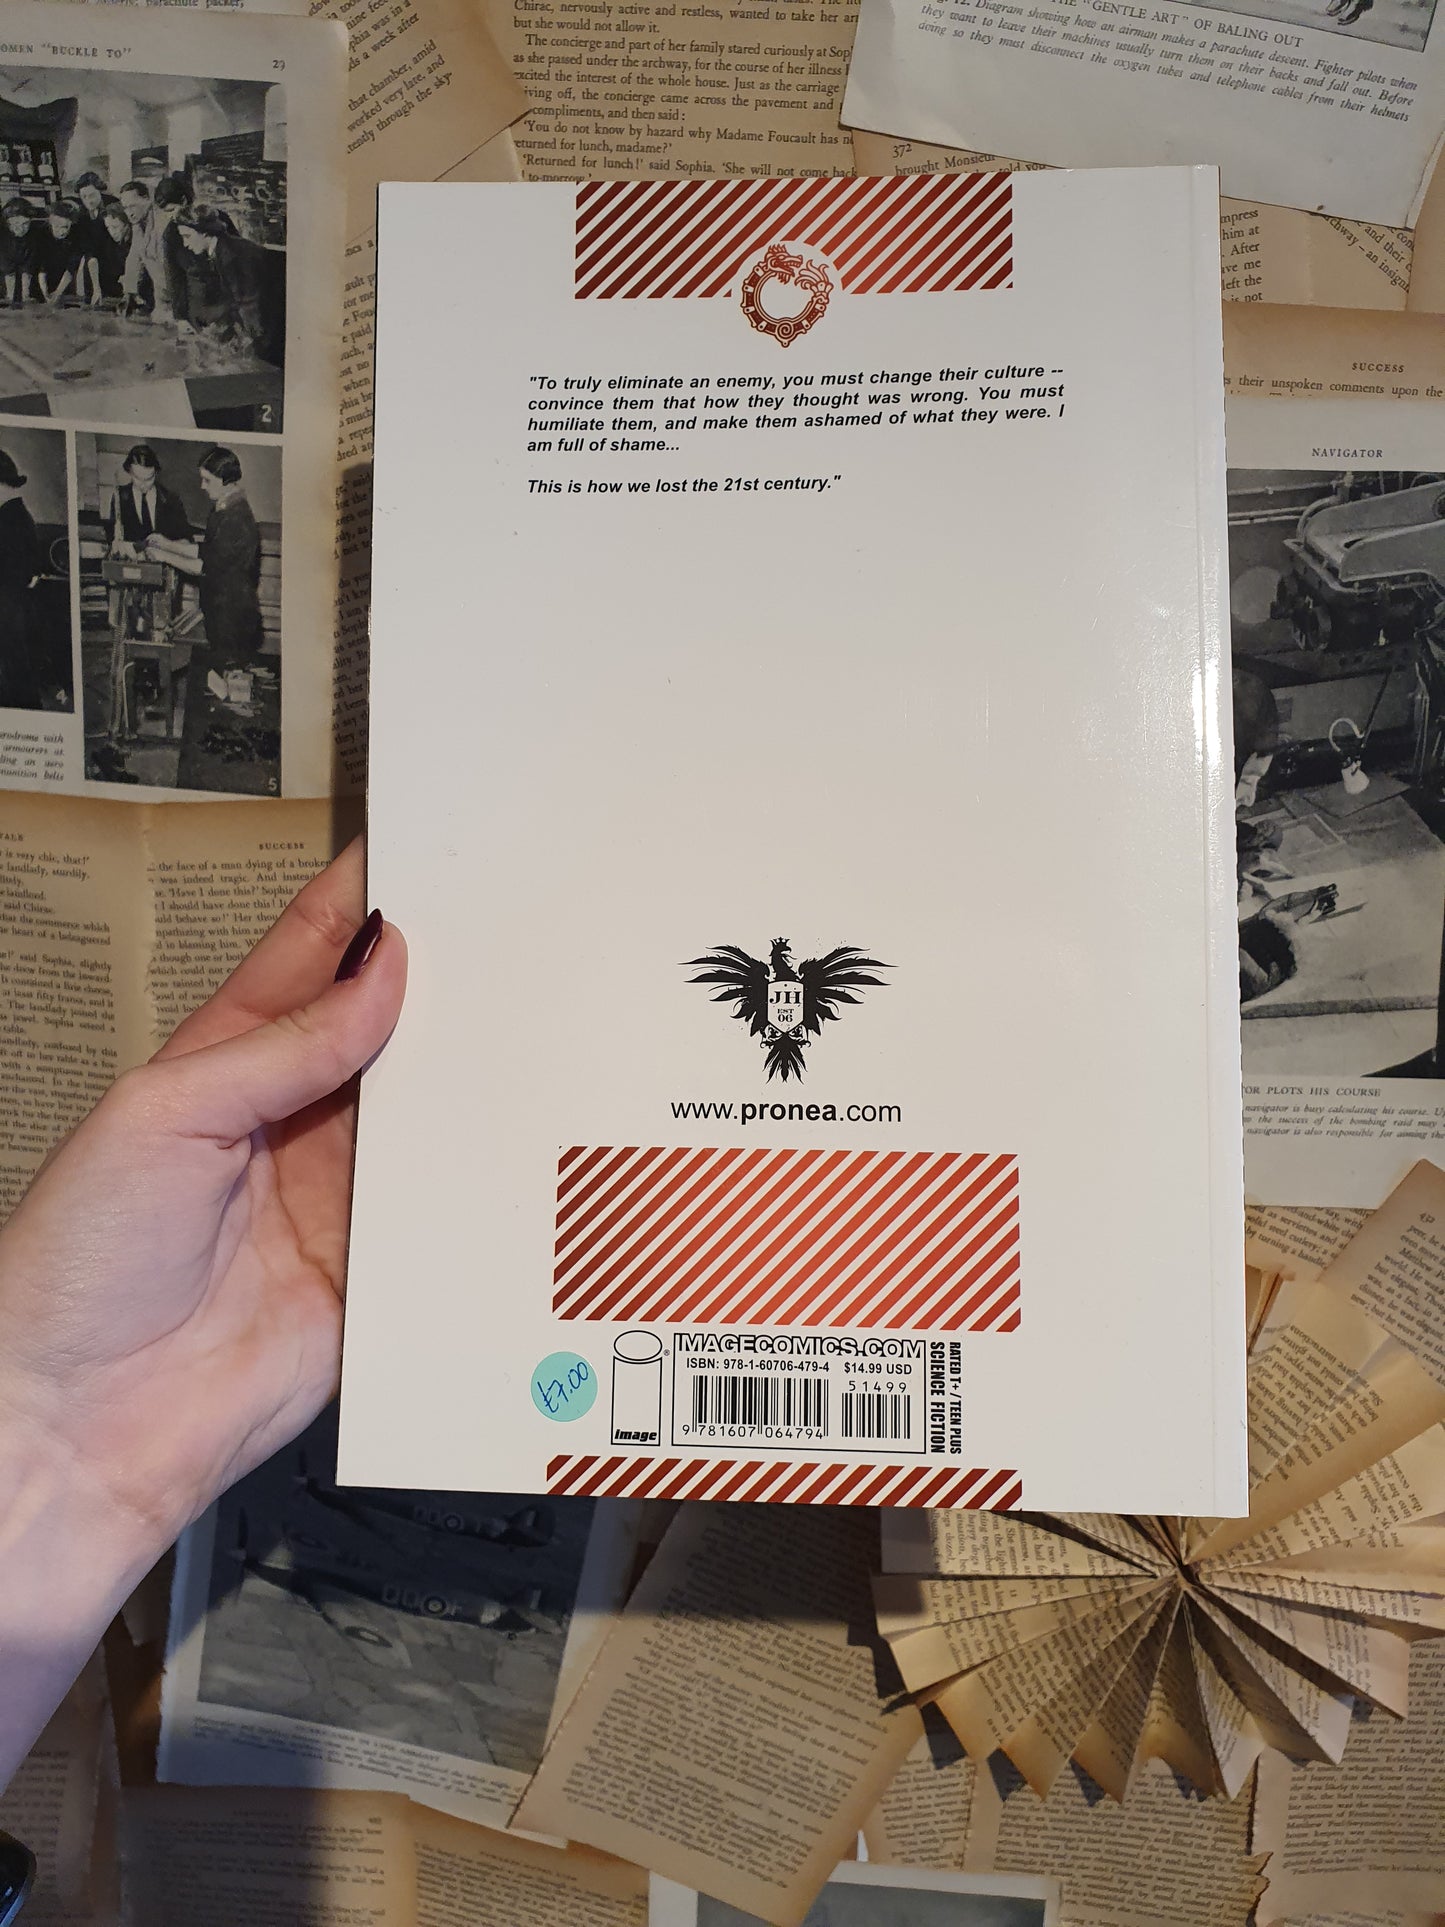 The Red Wing by Hickman & Pitarra (2011)